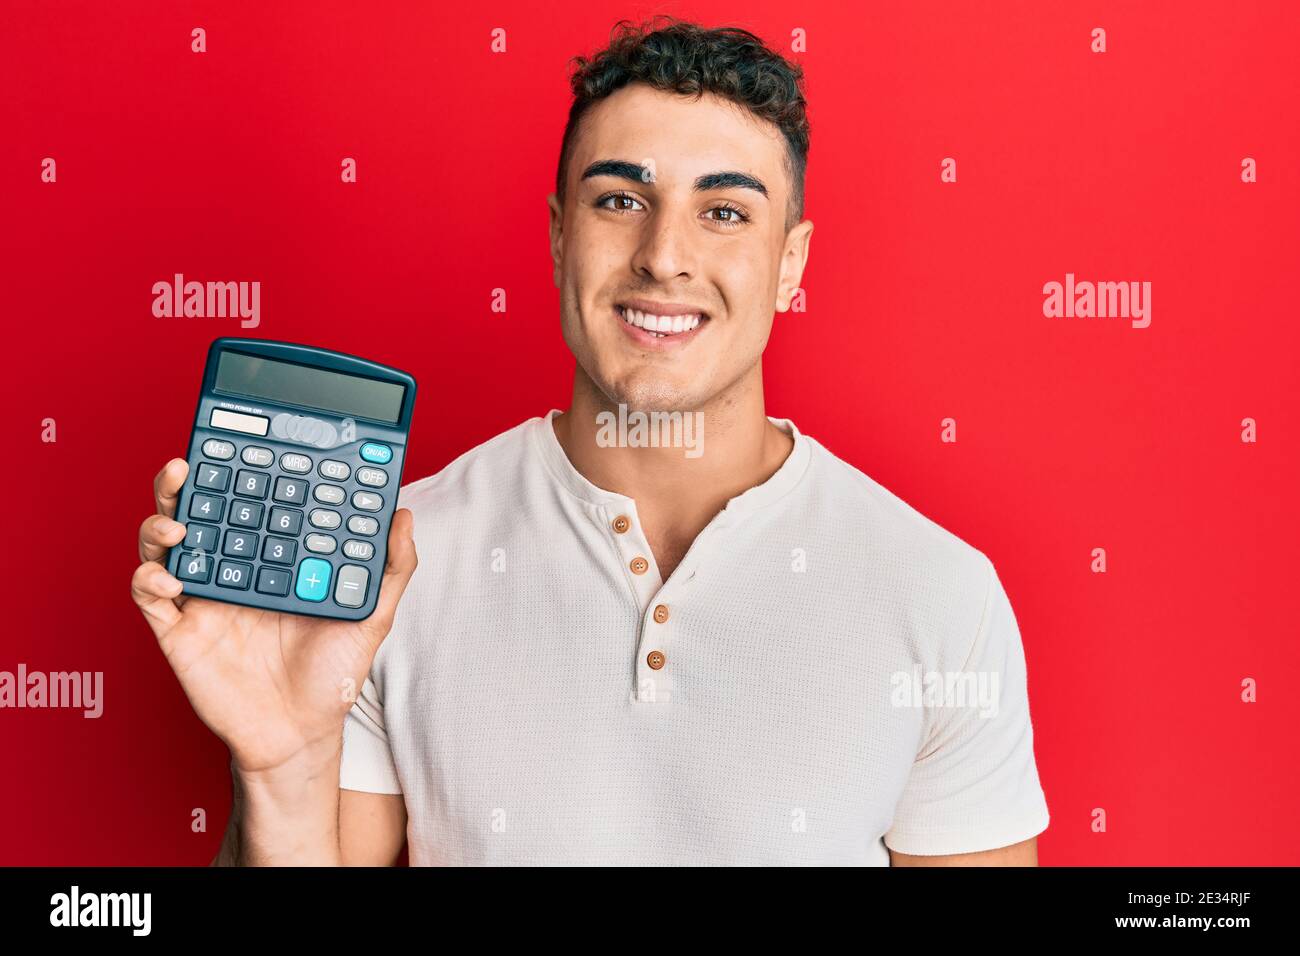 Hispanic young man showing calculator device looking positive and happy  standing and smiling with a confident smile showing teeth Stock Photo -  Alamy